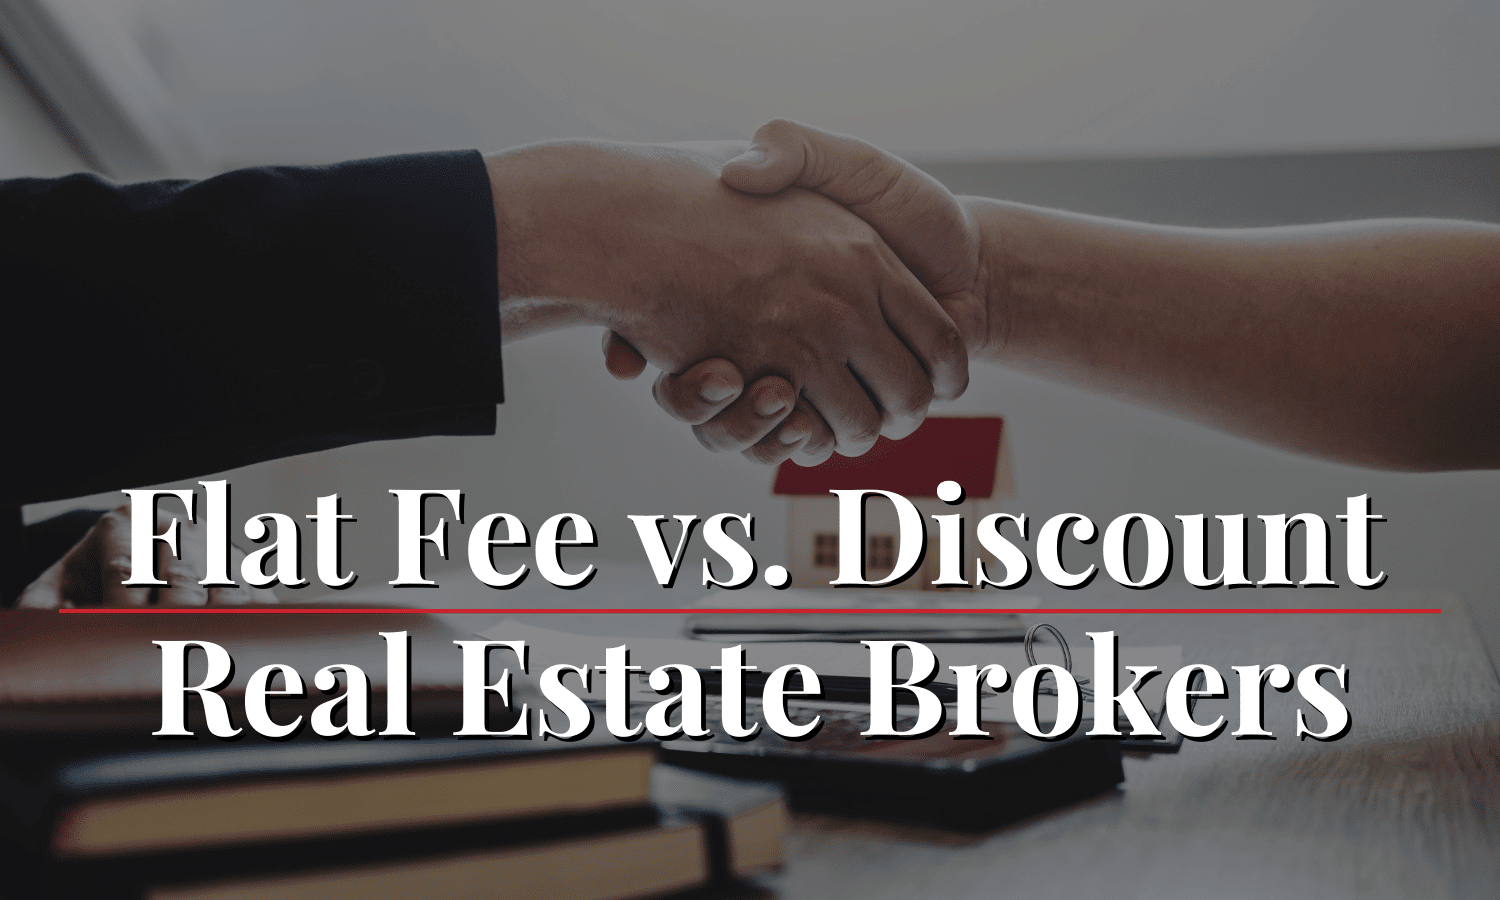 A discount real estate broker and client shaking hands